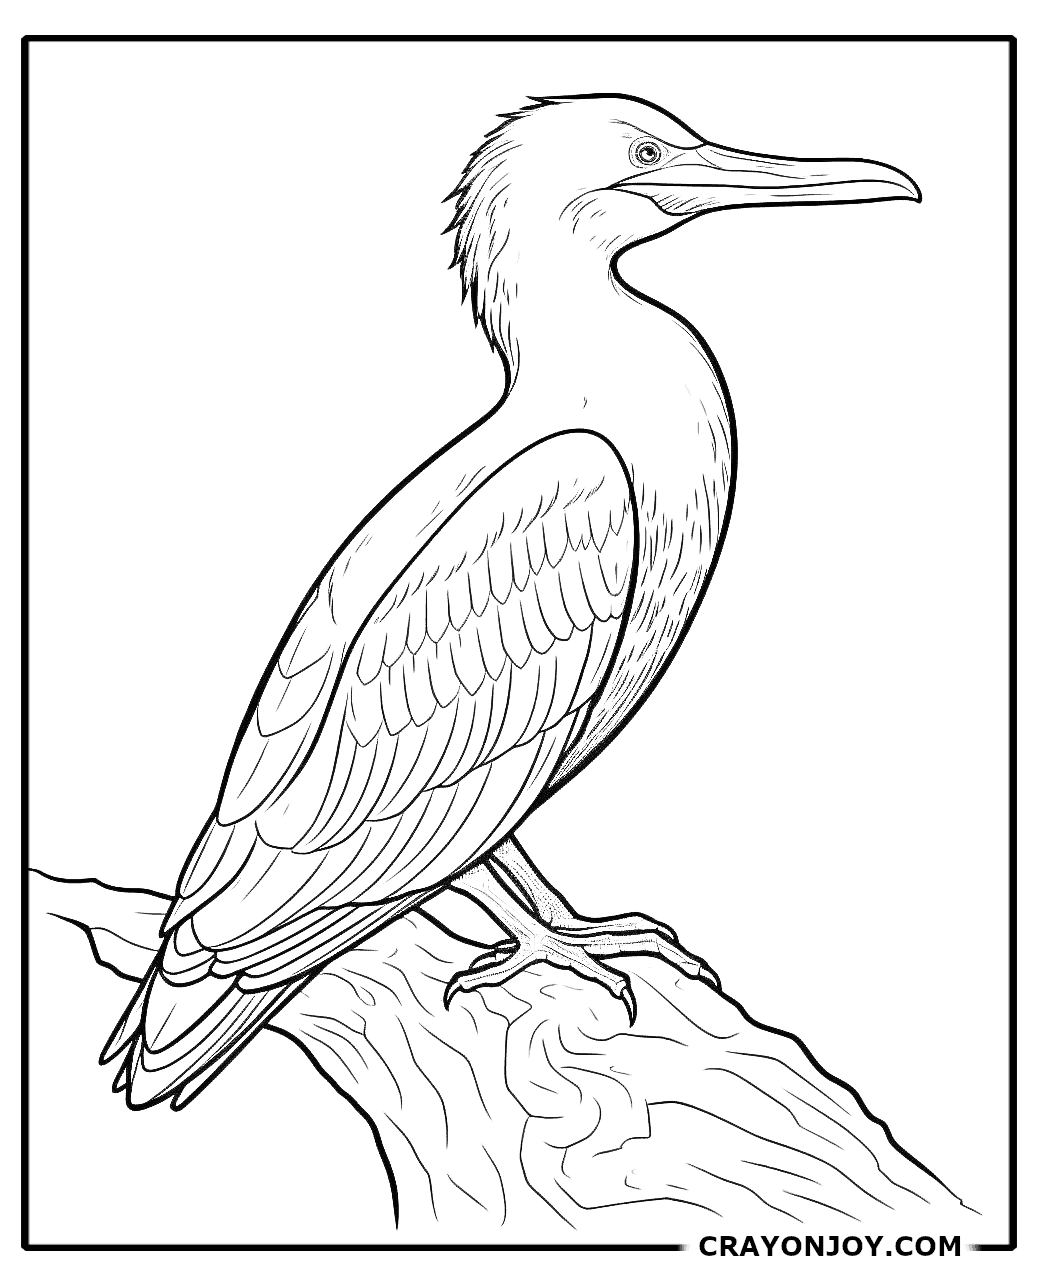 Cormorant Coloring Pages: Free Printable Sheets for Kids and Adults